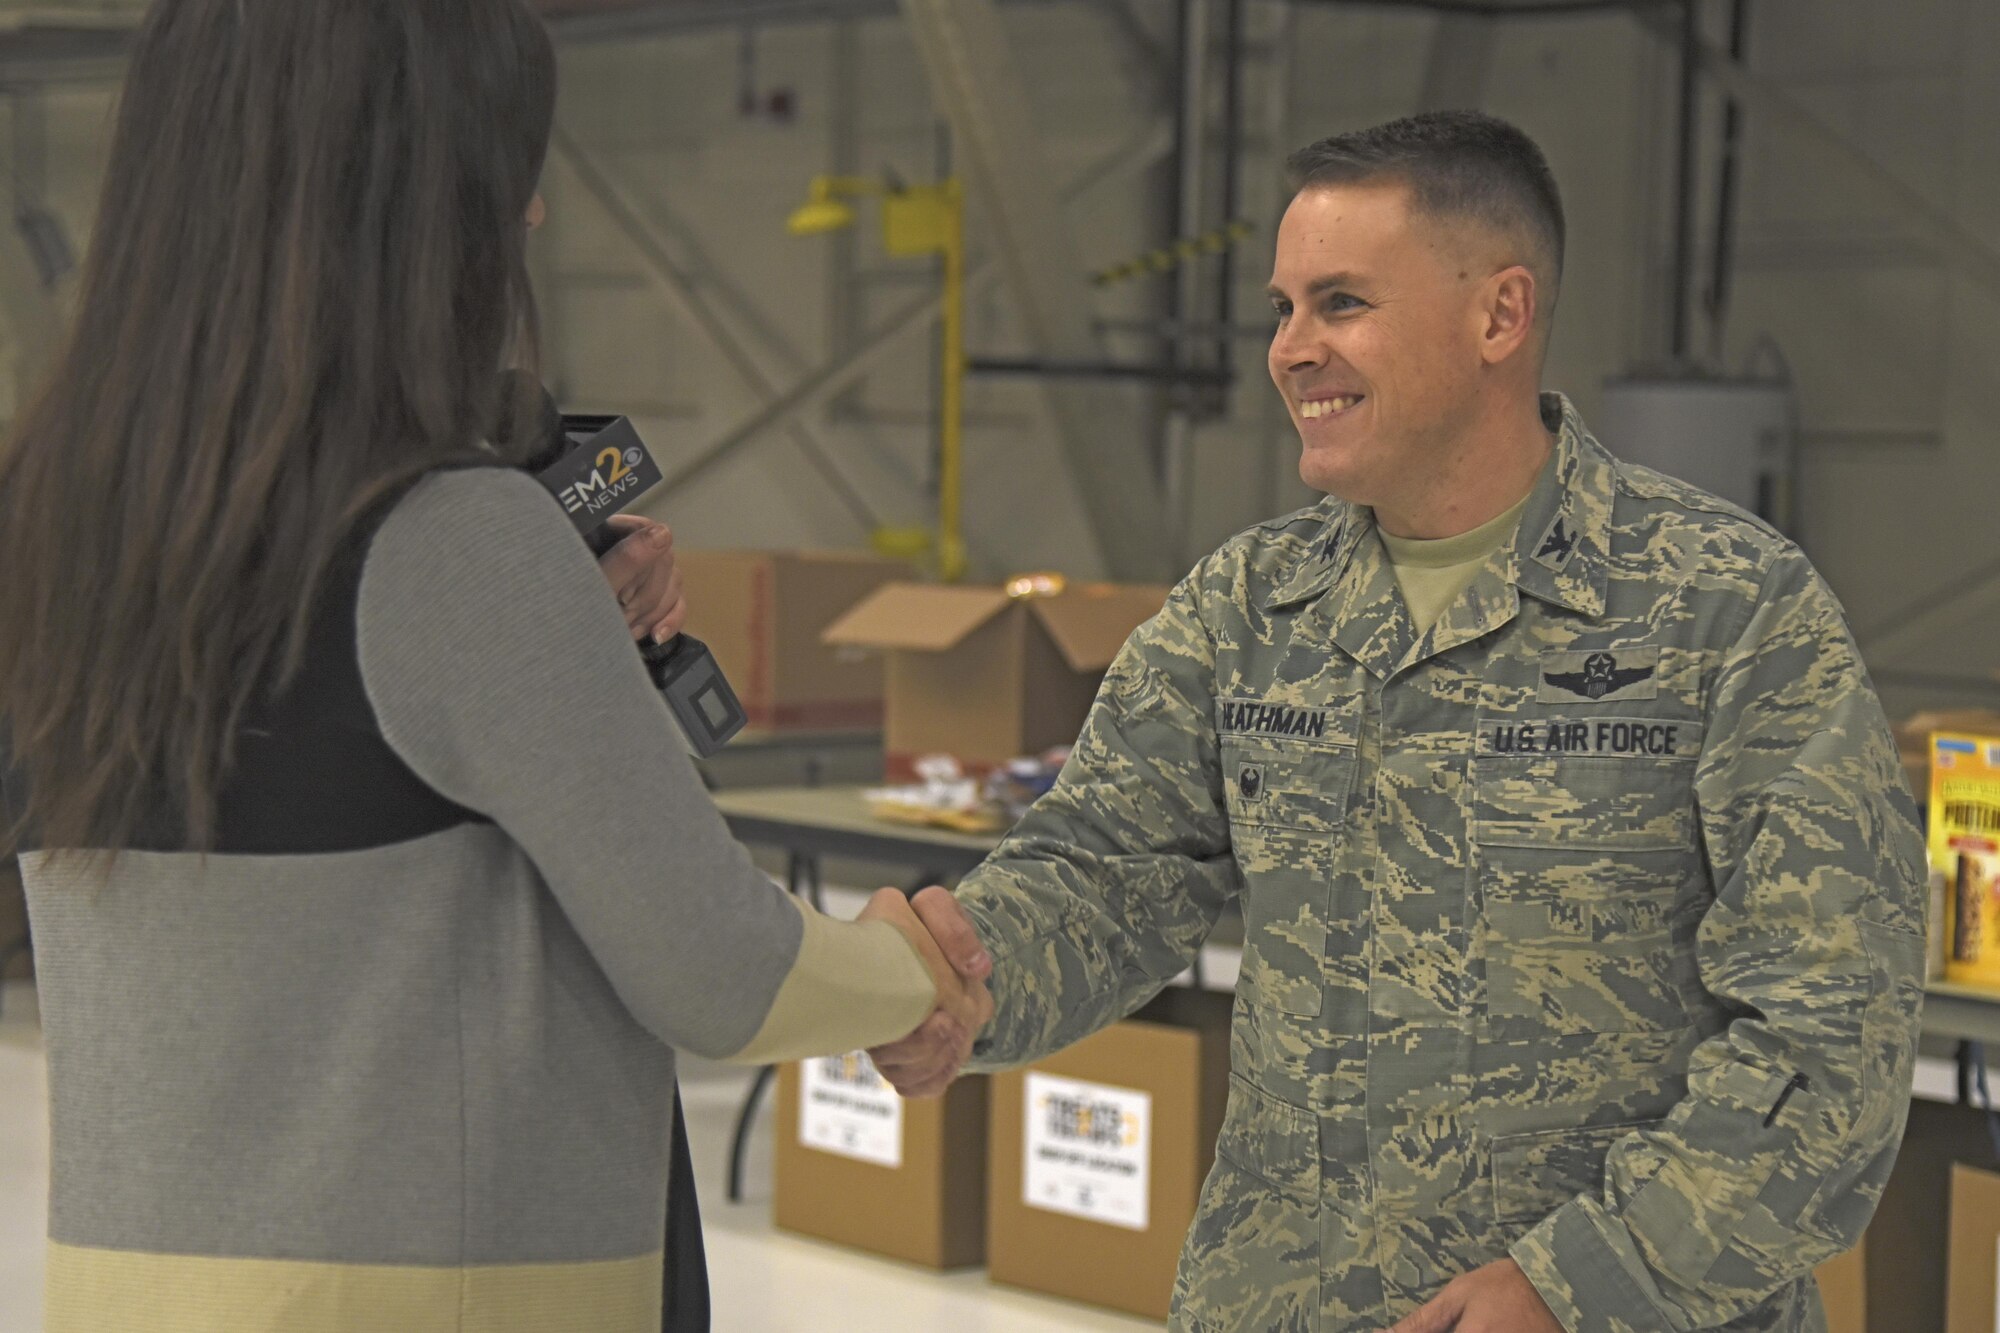 Col. Scot Heathman, 92nd Air Refueling Wing vice commander, talks with KREM 2 News anchor, Laura Papetti, about the benefits of the Treats 2 Troops initiative during a live interview Nov. 29, 2017, at Fairchild Air Force Base, Washington. KREM 2 News partnered with Team Fairchild for the seventh year in a row to fill care packages with small treats and gifts to help benefit military members serving overseas during the holiday season. (U.S. Air Force photo/Senior Airman Mackenzie Richardson)